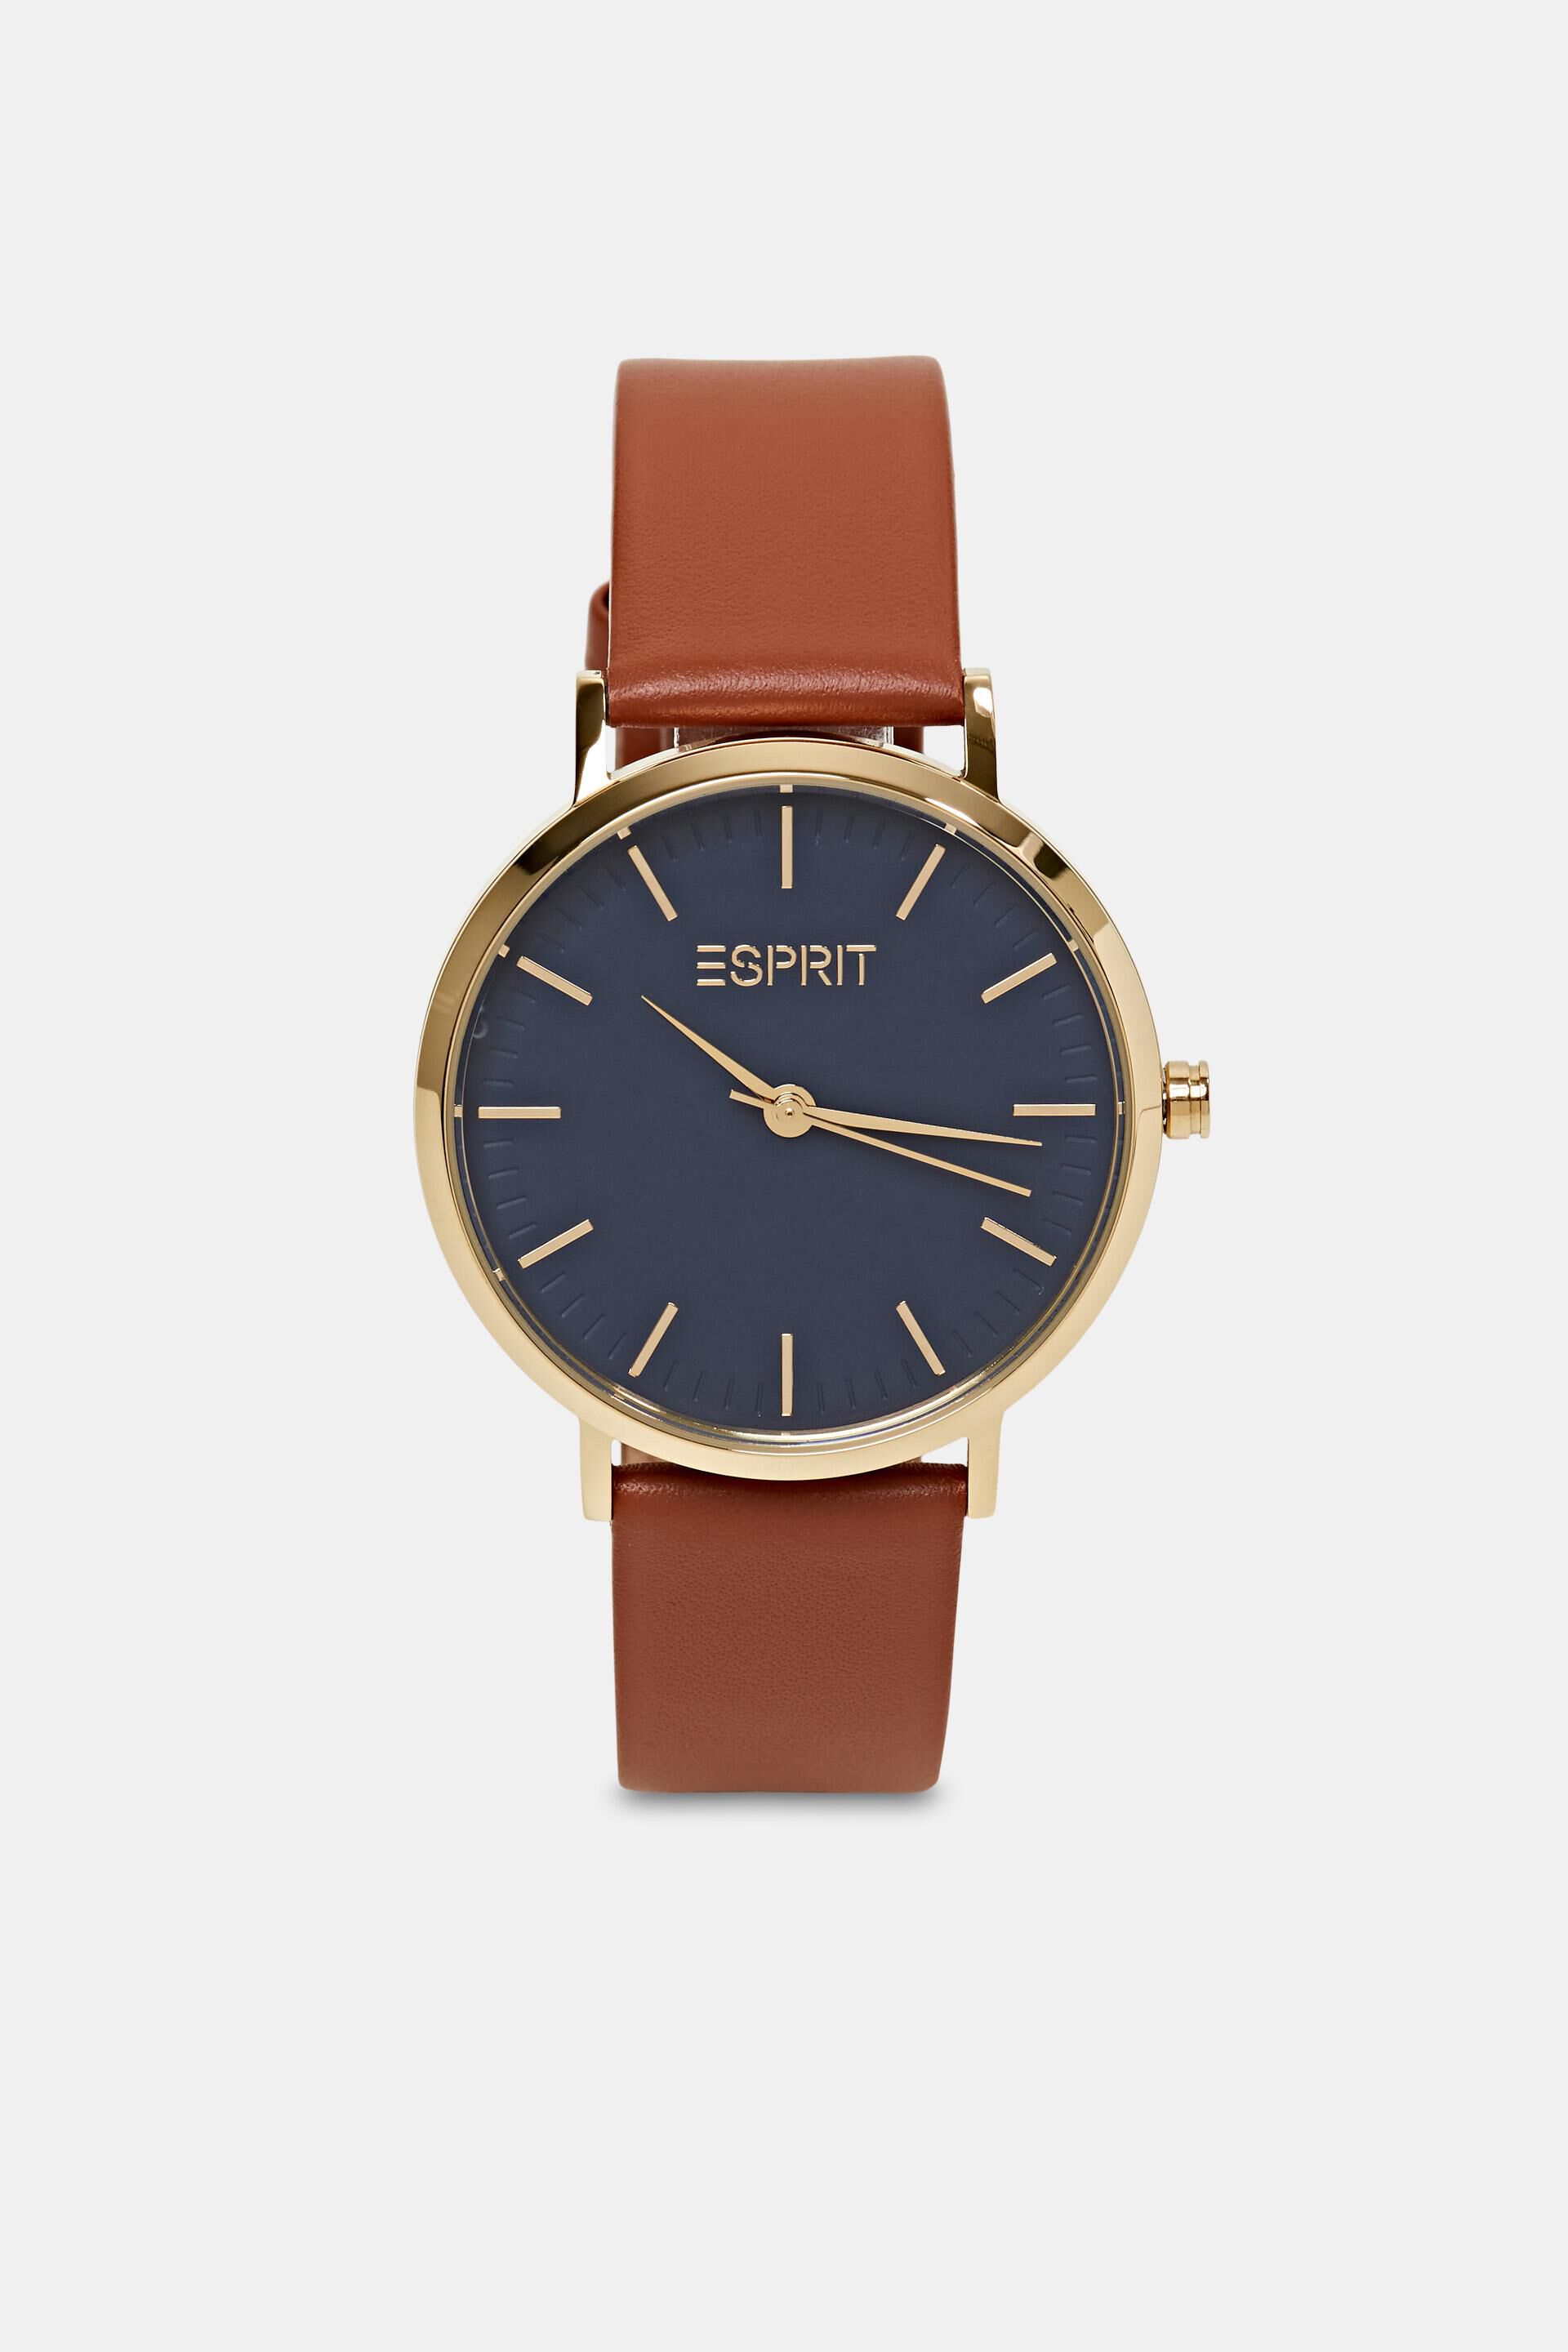 Esprit Mode Gold-Tone Stainless Steel Watch Leather